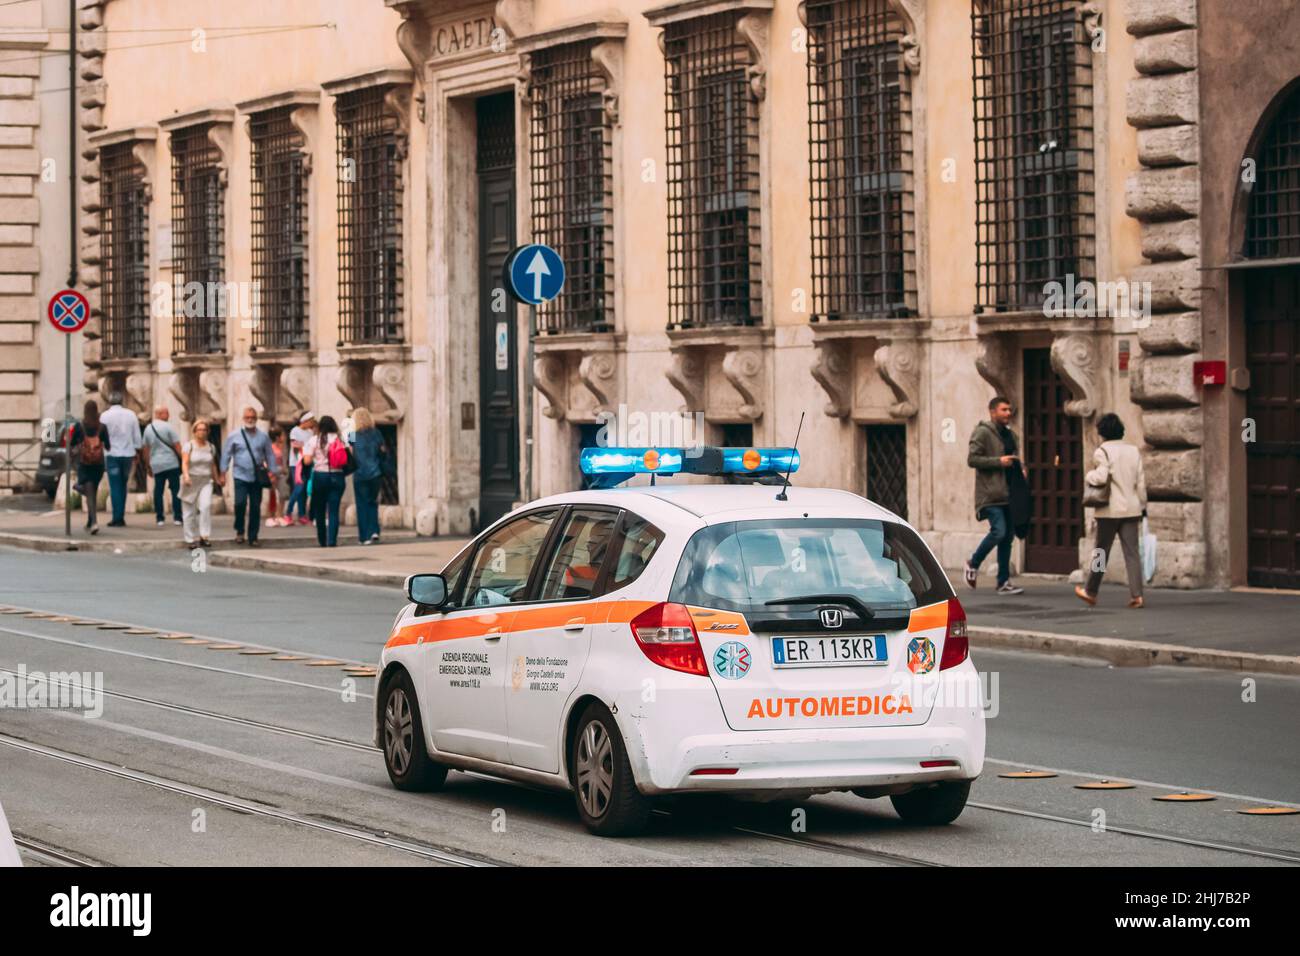 Rome, Italy. Moving With Siren Emergency Ambulance Small Honda Car On Street. Emergency Lights System Els Activated. Stock Photo